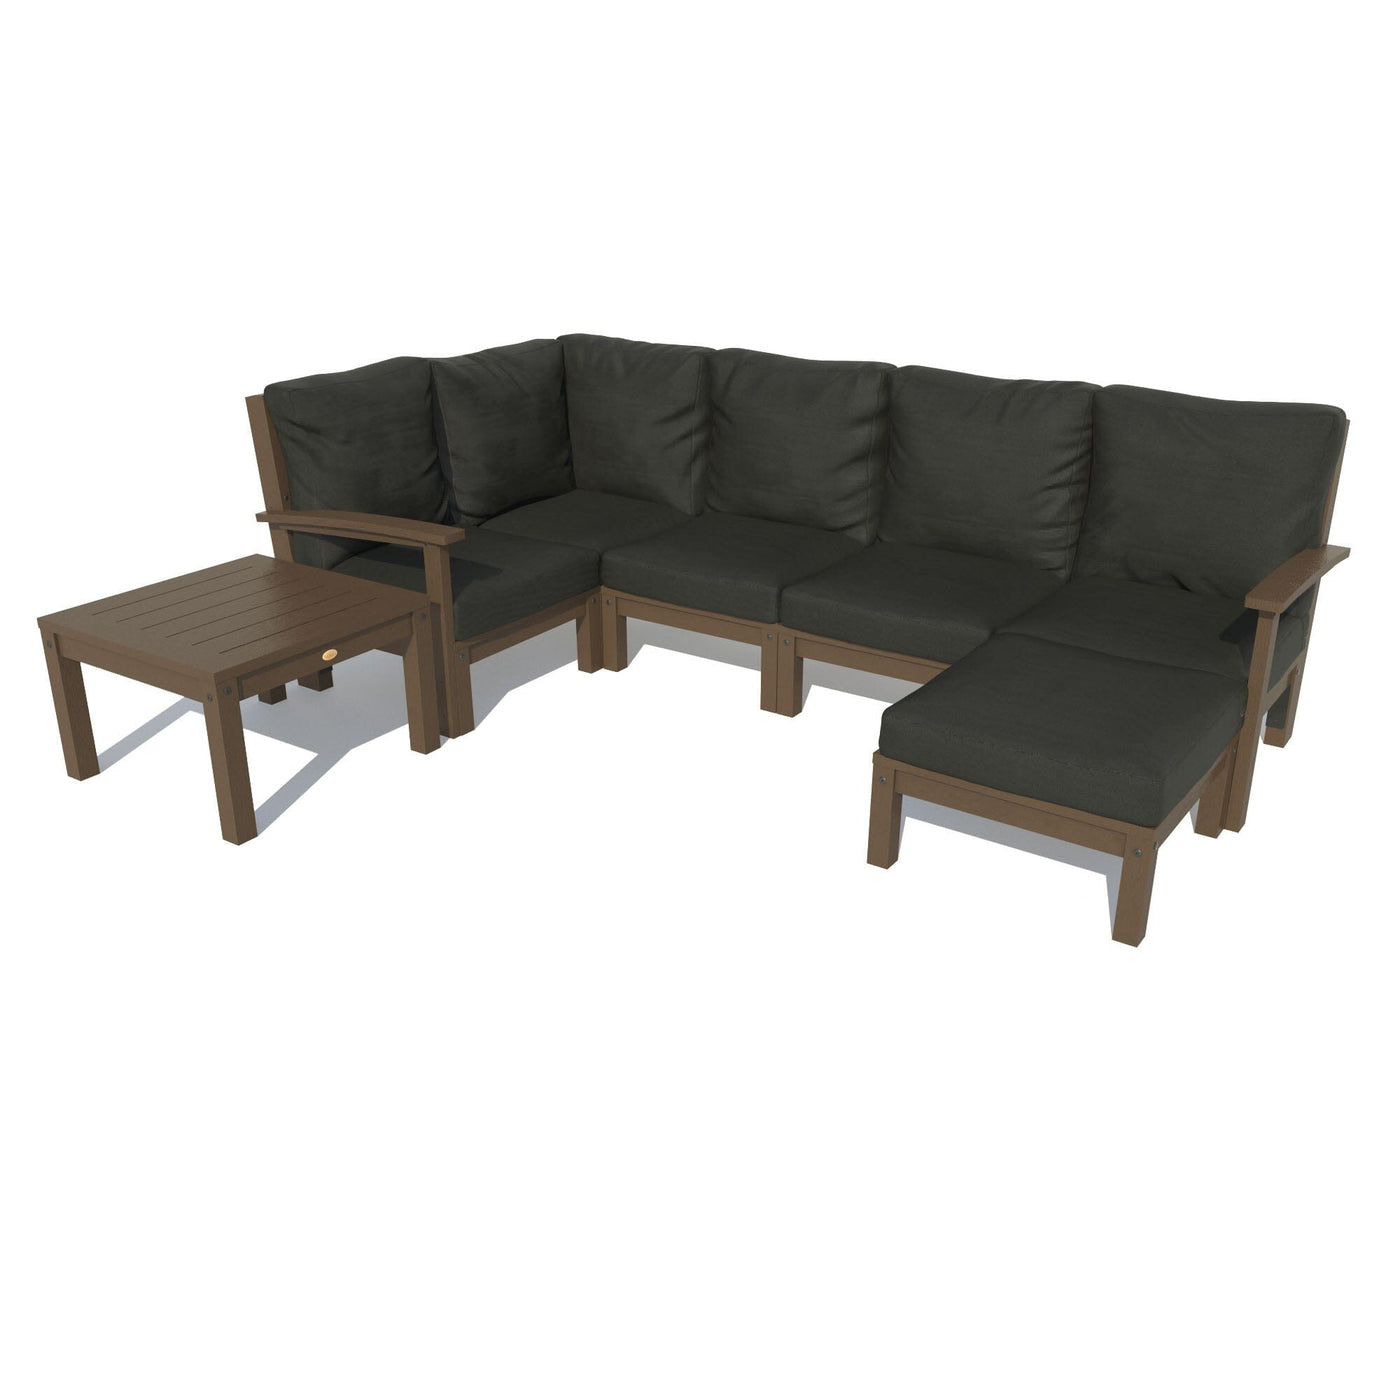 Bespoke Deep Seating: 7 Piece Sectional Set with Ottoman and Side Table Deep Seating Highwood USA Jet Black Weathered Acorn 